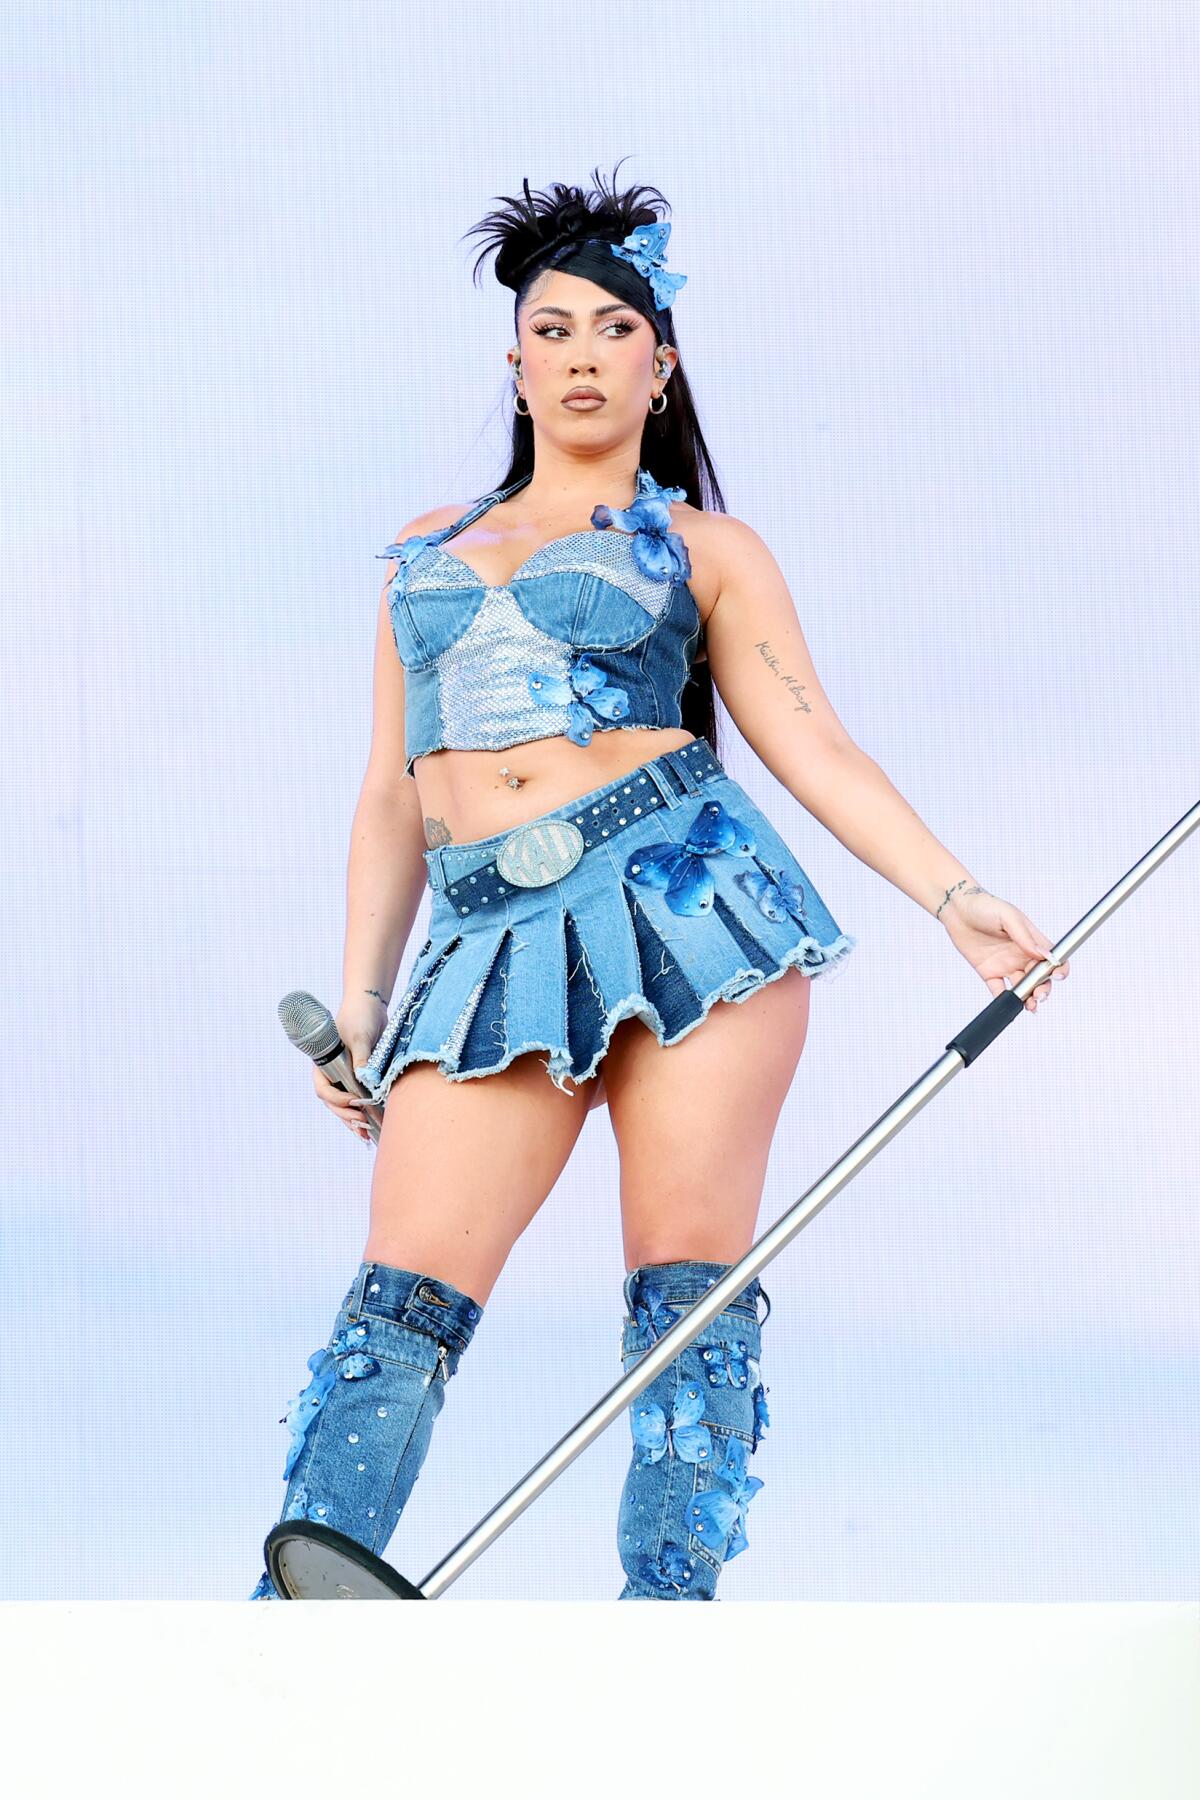 A woman in a blue bustier top, cheerleader skirt and boots tilts a mic stand